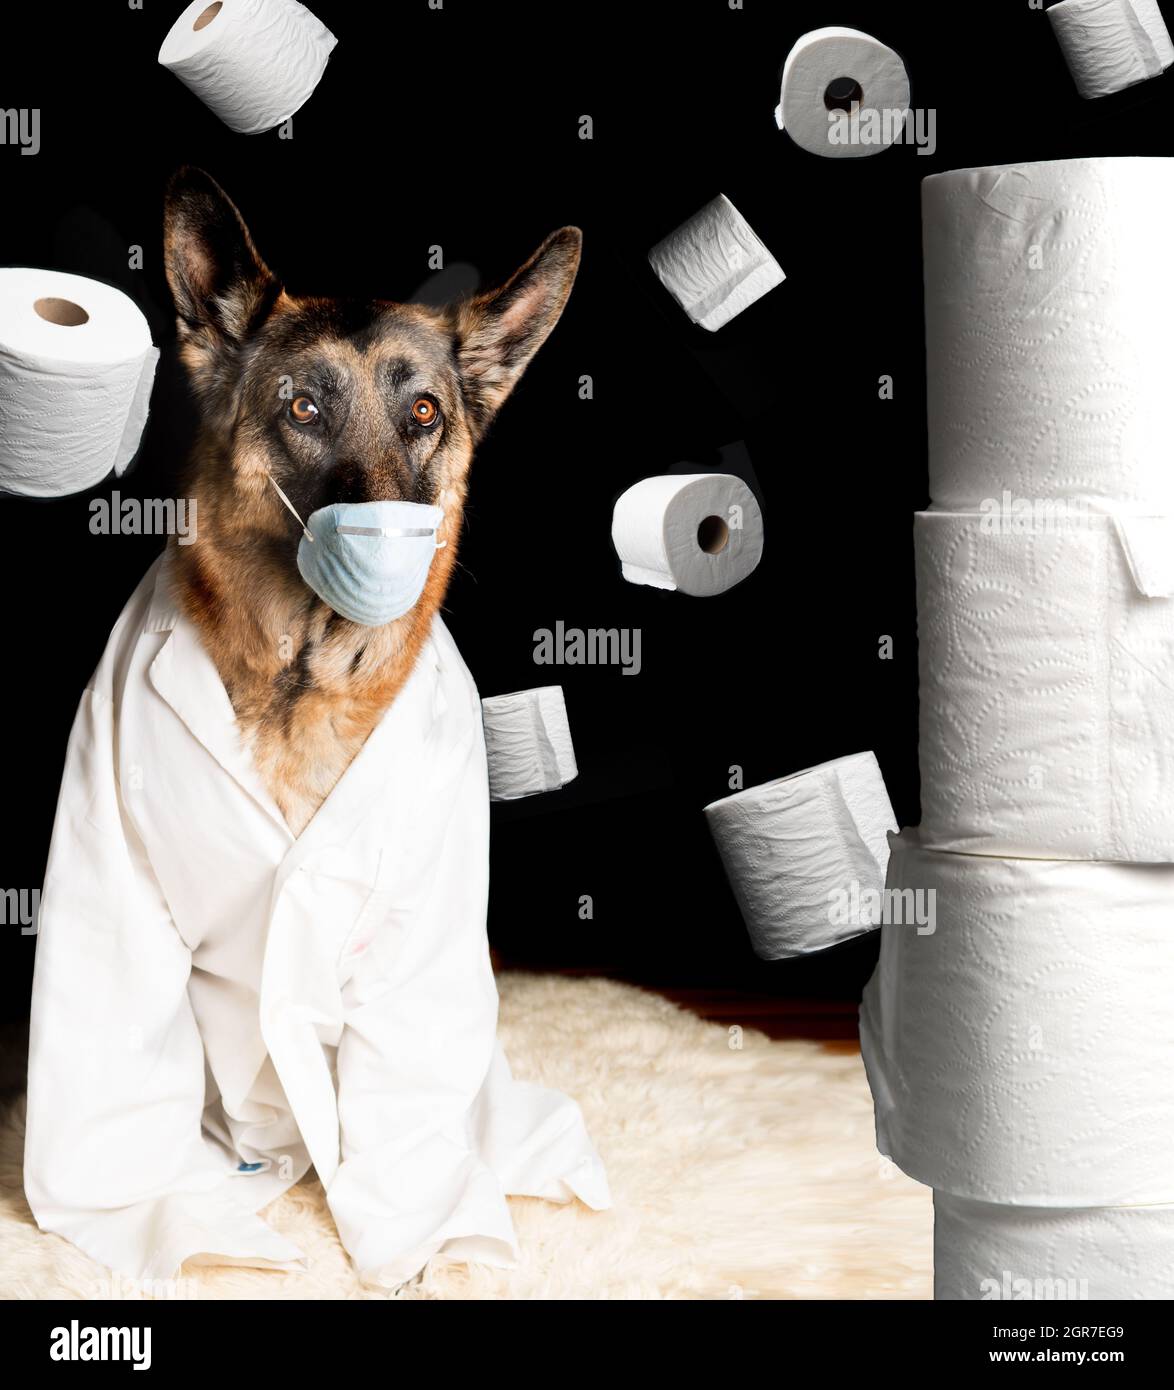 Dog Toilet Paper High Resolution Stock Photography and Images - Alamy